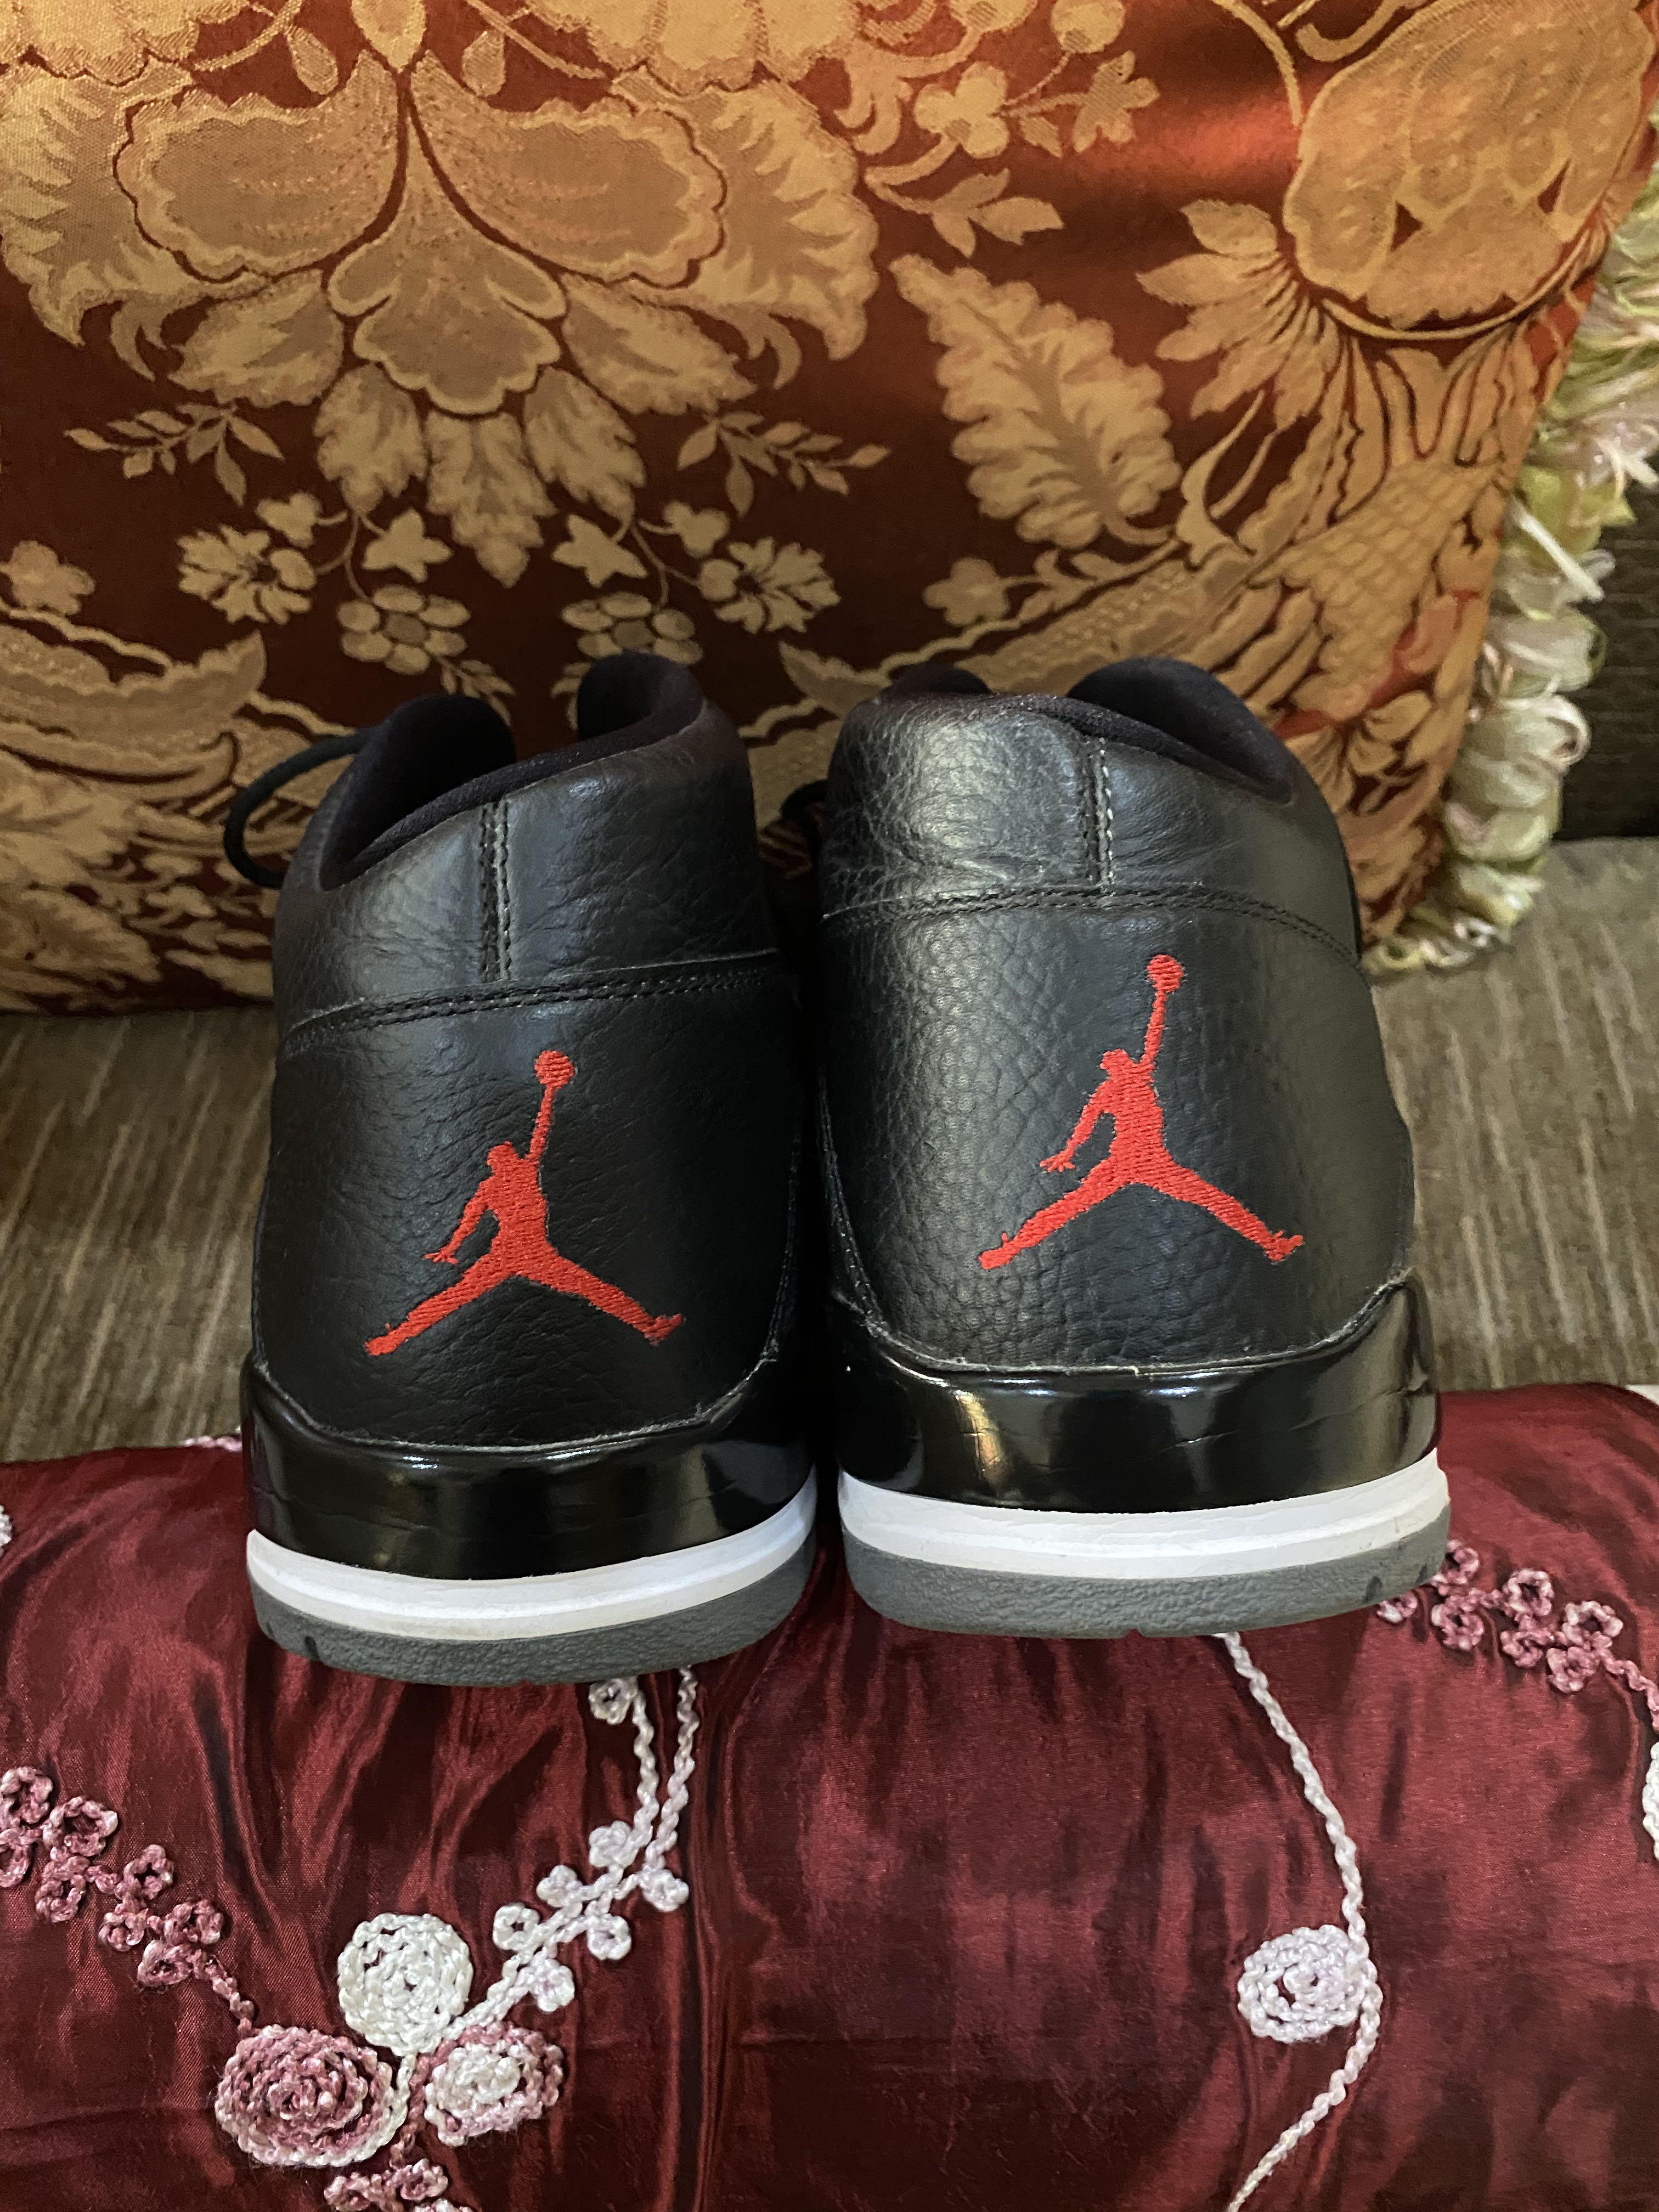 Jordan V IV III Red Black Laceup Basketball Shoes, Men's Fashion, Footwear,  Sneakers on Carousell